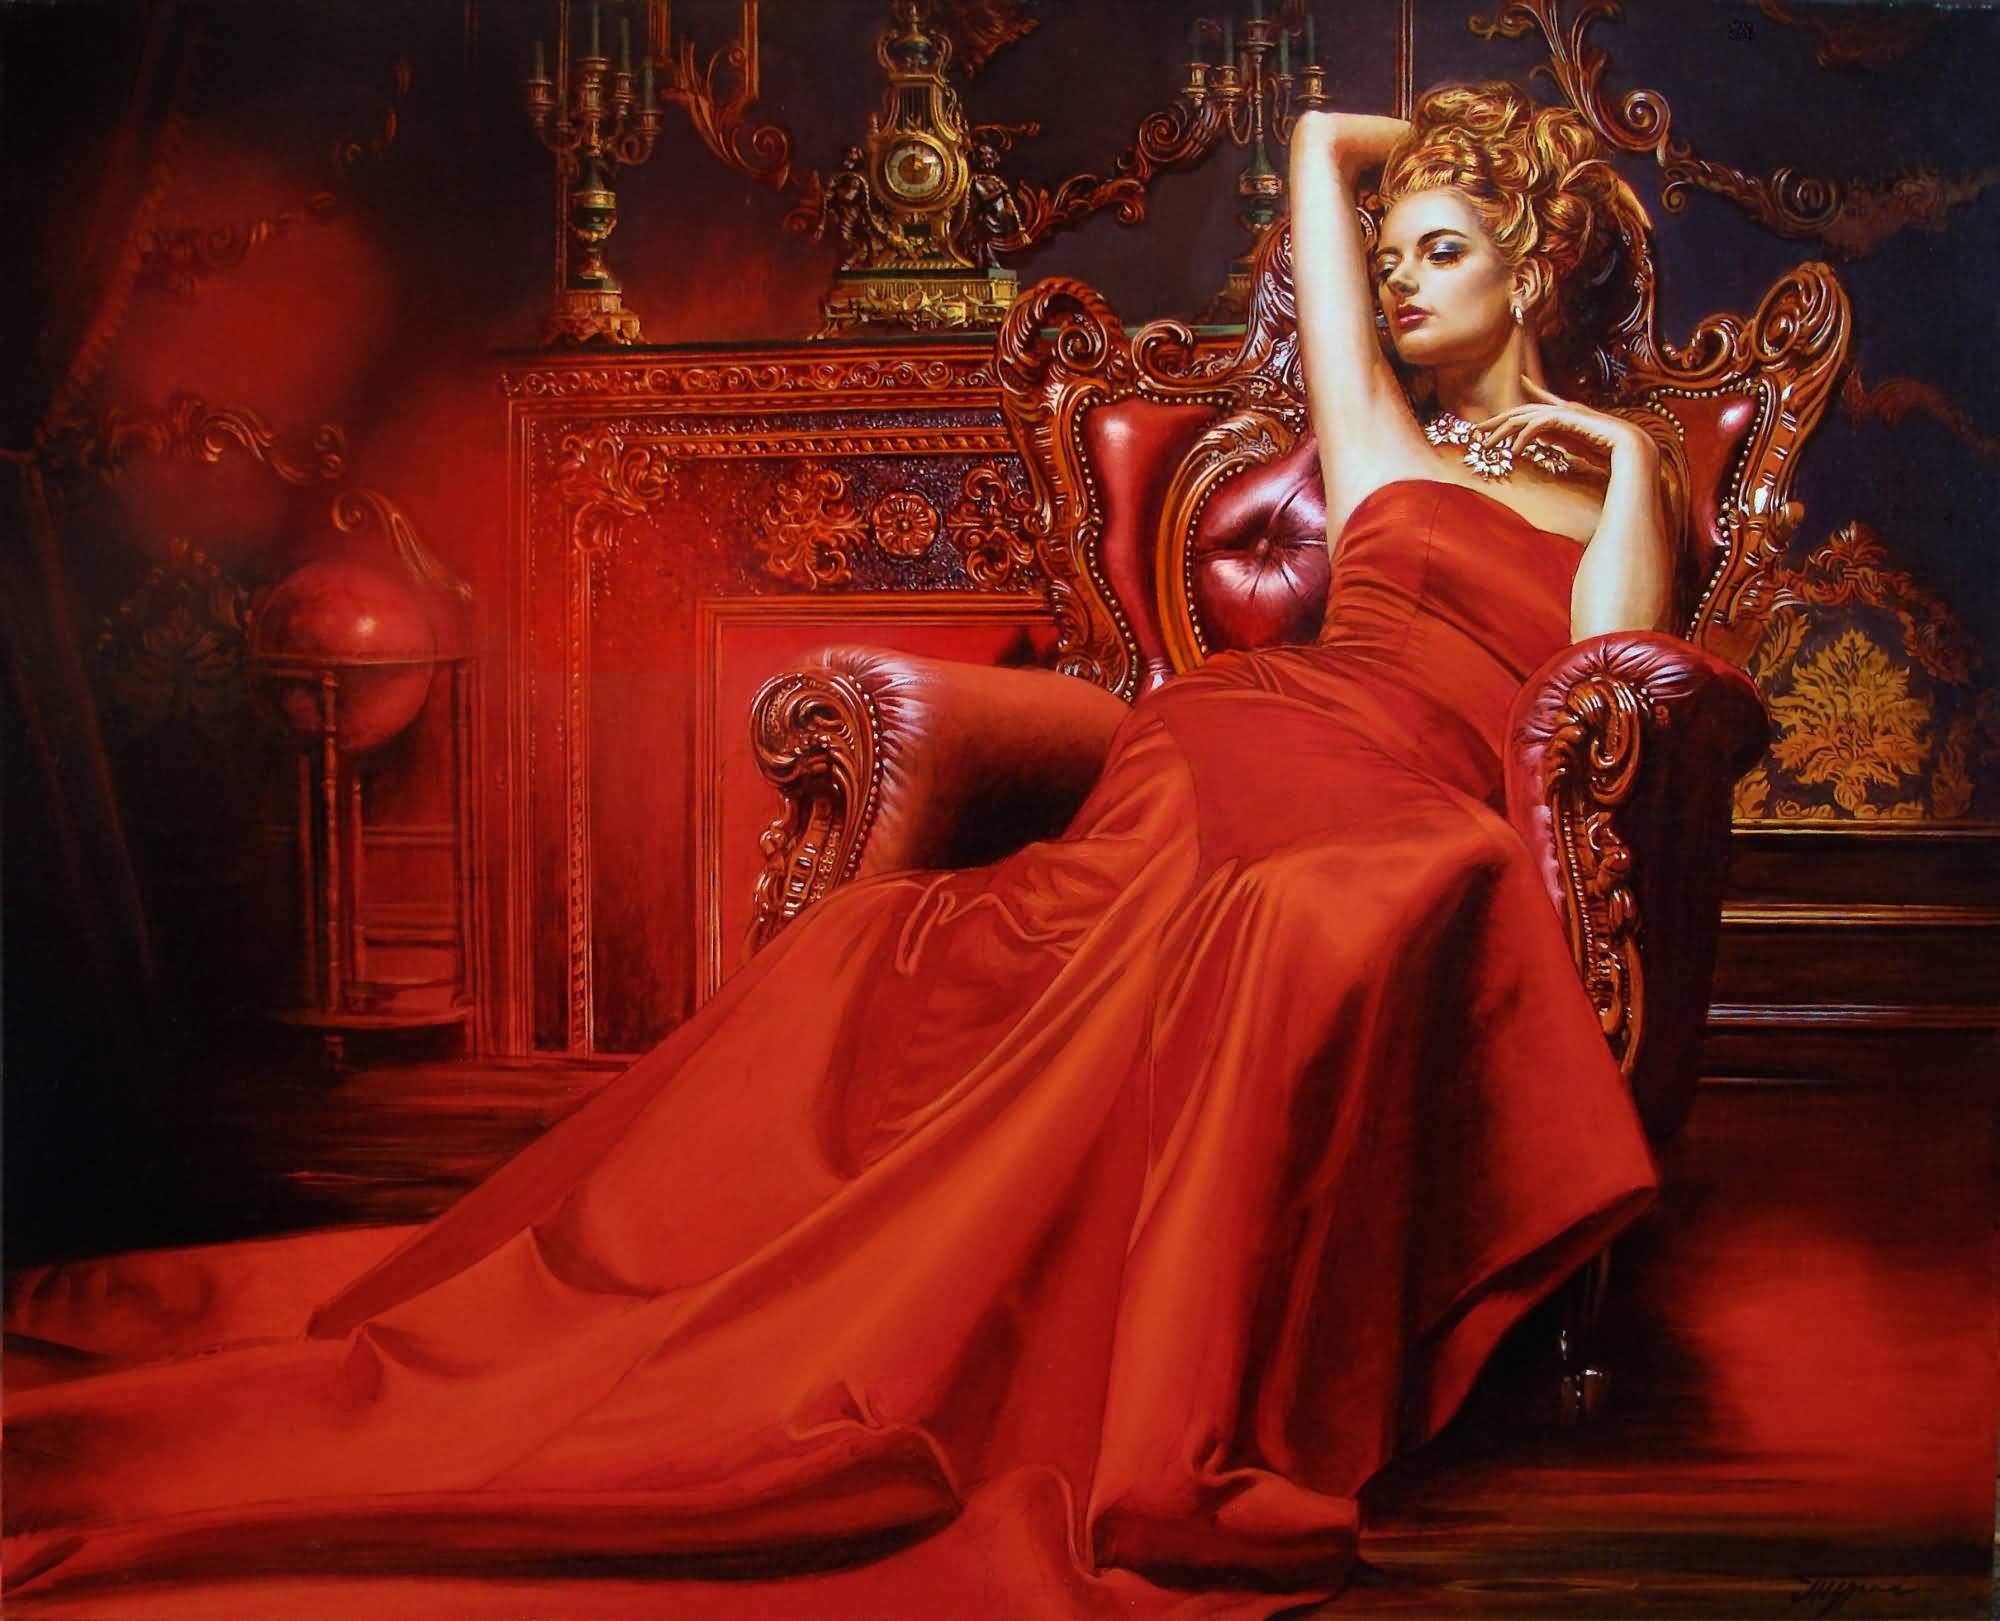 Lady in red, oil on canvas, 26.77"h x31.5"w (68x80cm), 2019